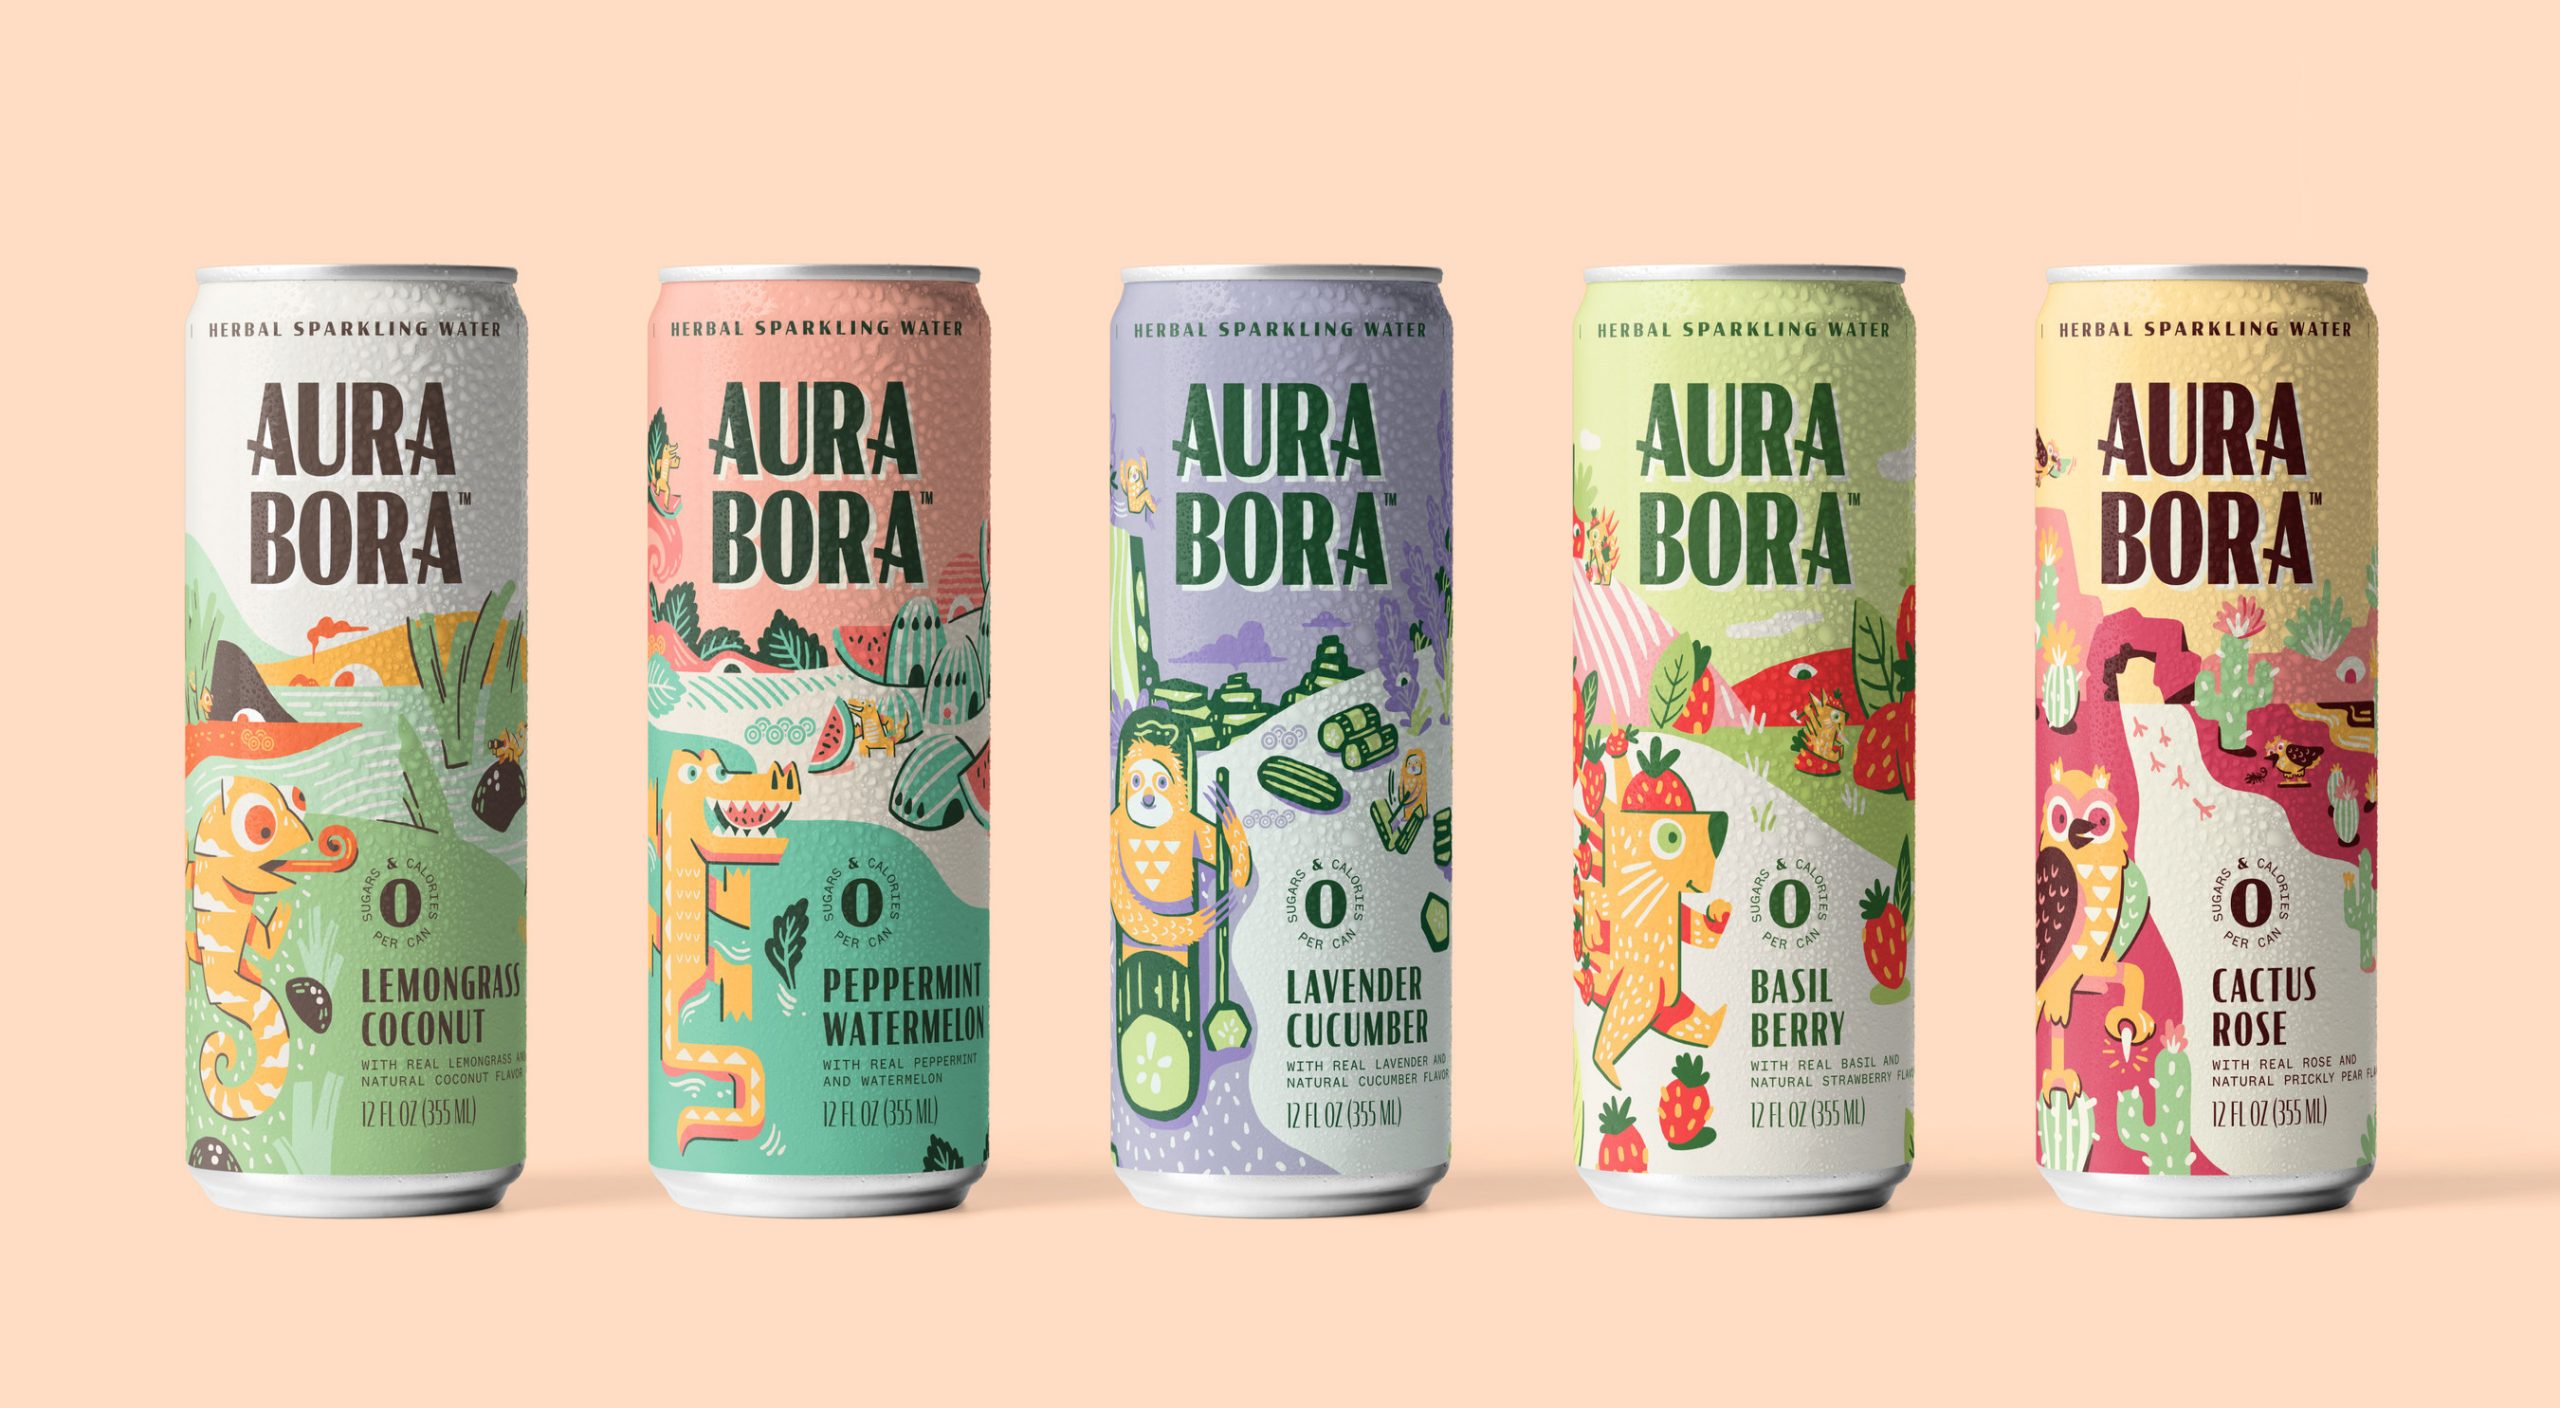 Aura Bora Brings Earthly Tastes To The Sparkling Water Aisle